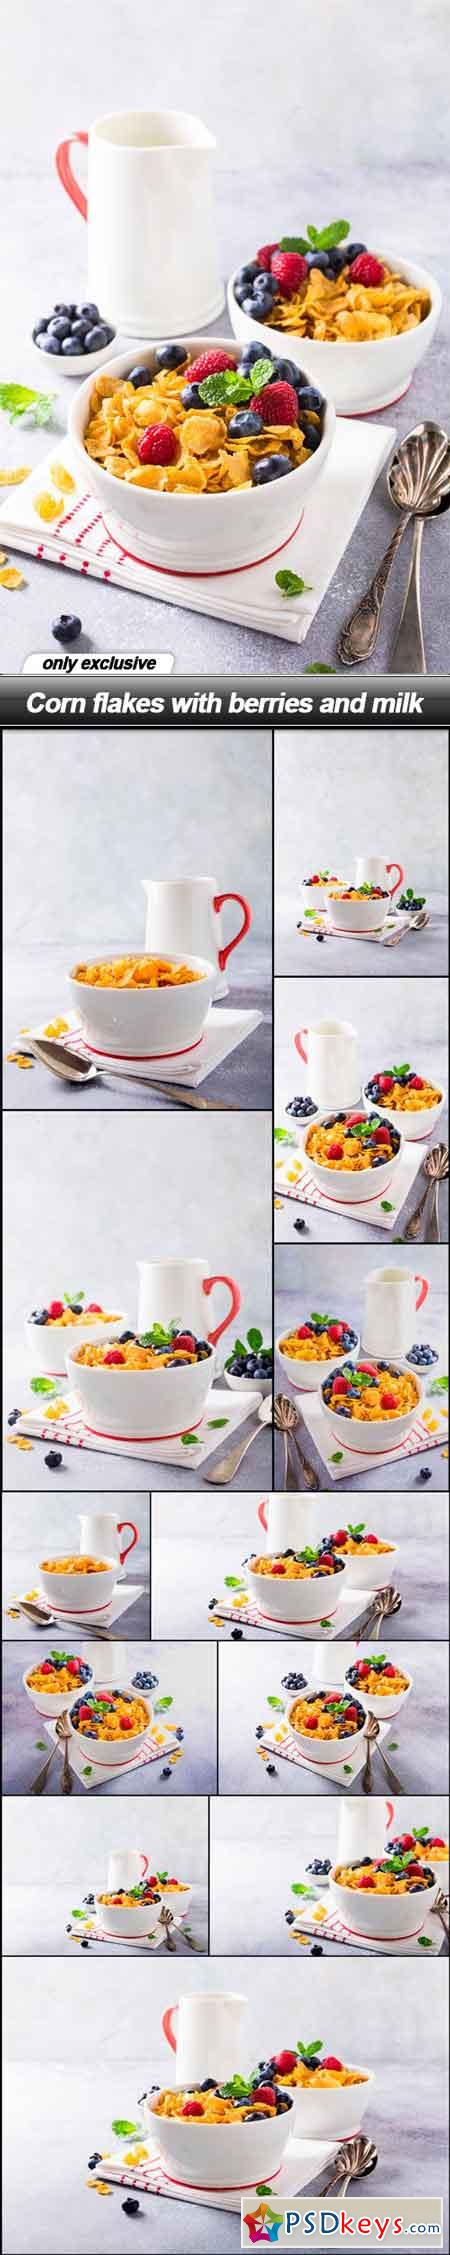 Corn flakes with berries and milk - 14 UHQ JPEG